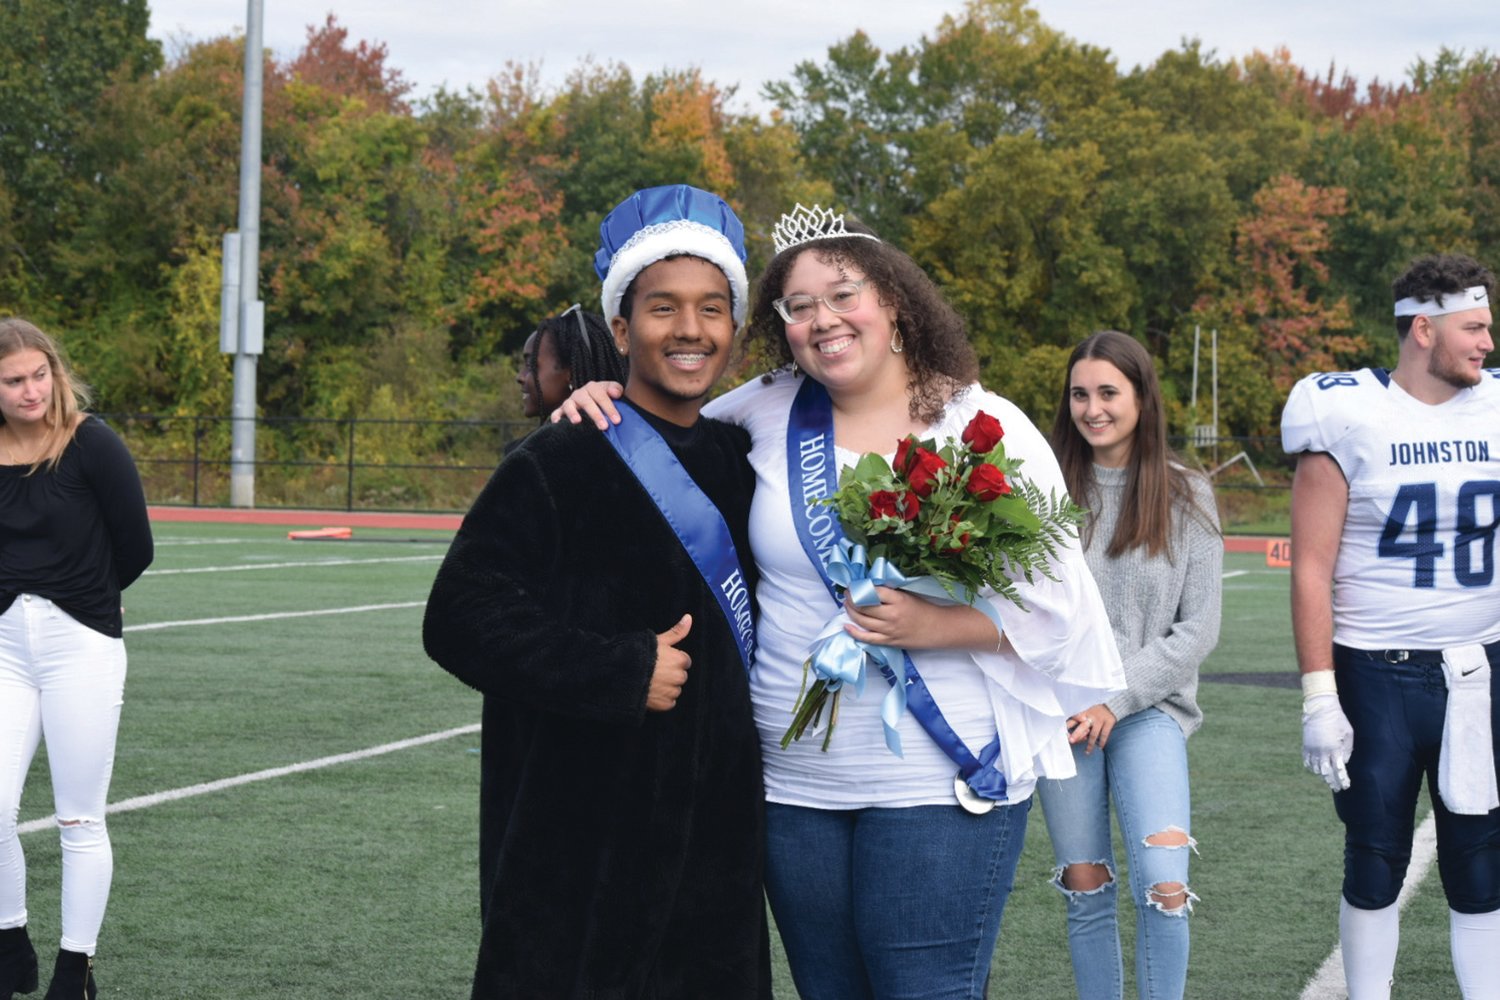 POPULAR PANTHERS: Jose Gonzalez and Glorianna Crichlow were crowned King and Queen of the recent JHS Homecoming that was judged an overwhelming success from start to finish of Spirit Week and the annual Dance.